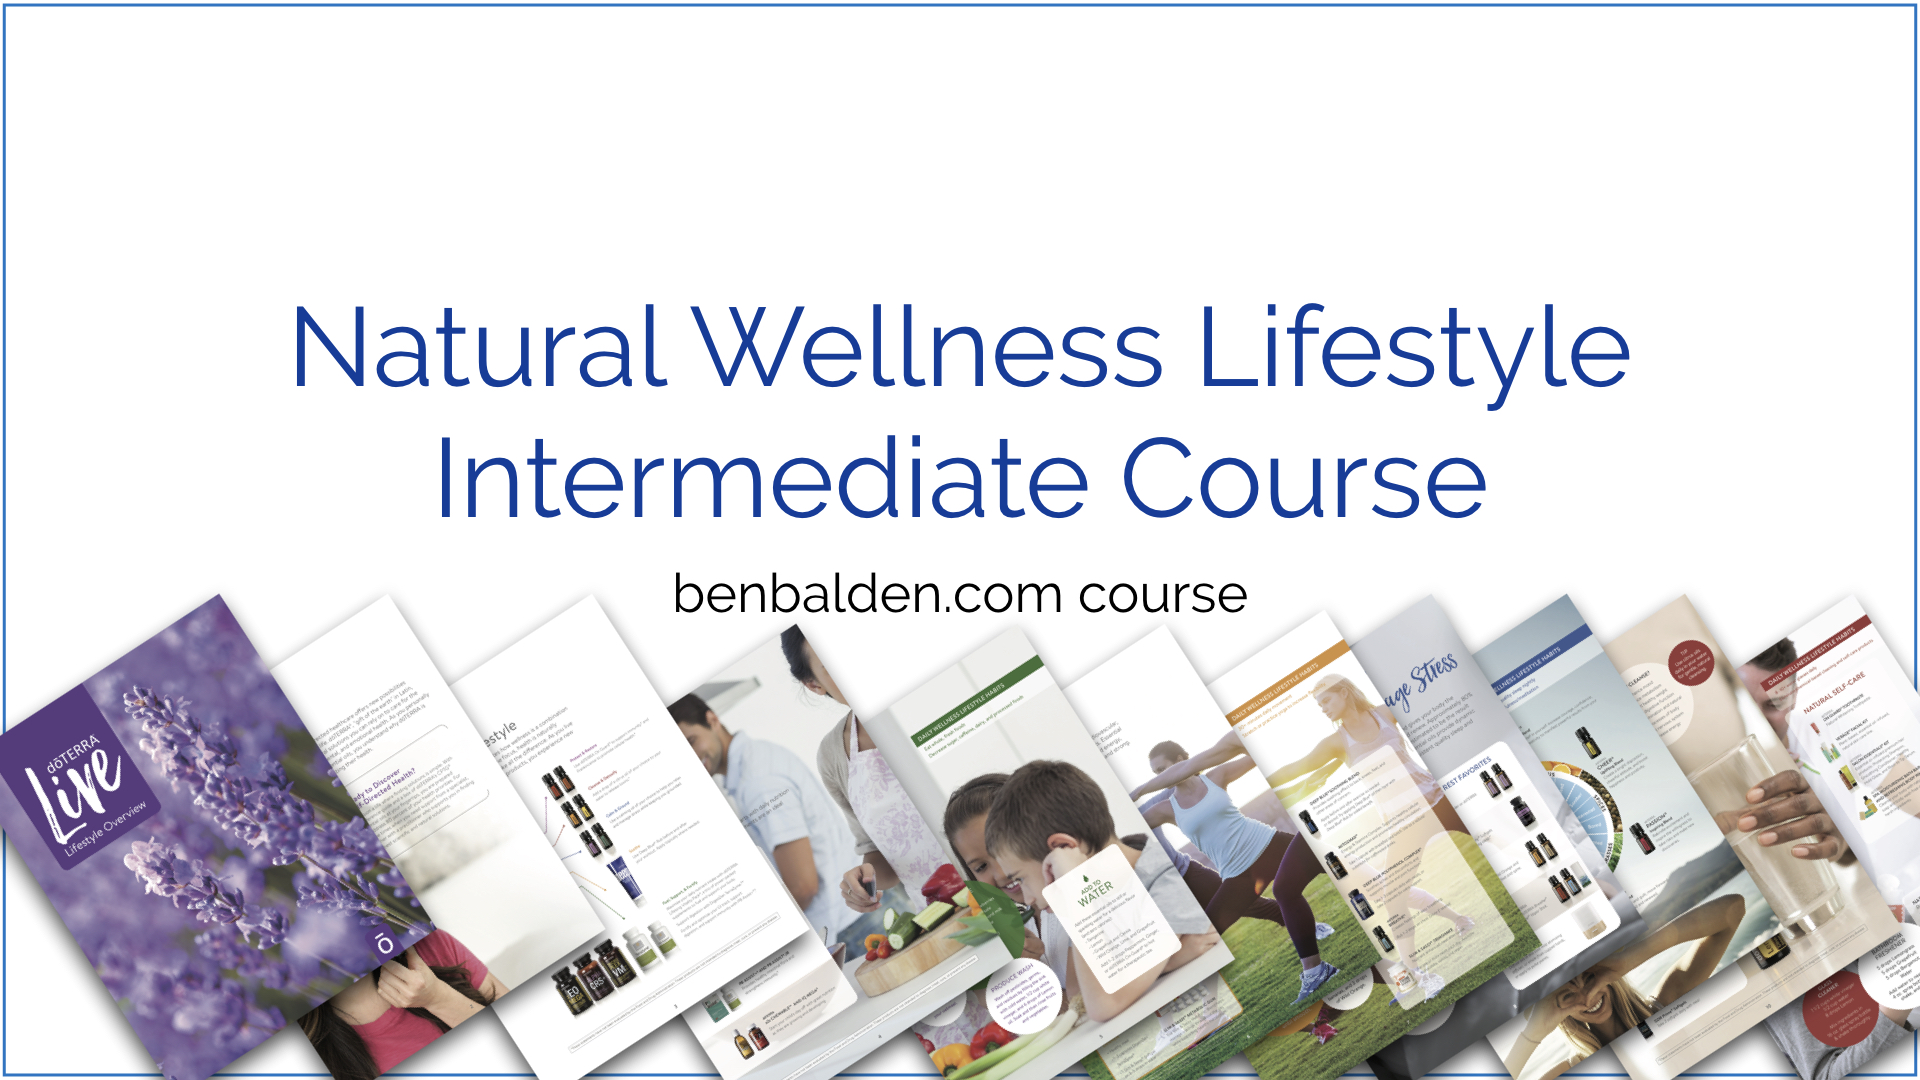 Natural Wellness Lifestyle Intermediate Course